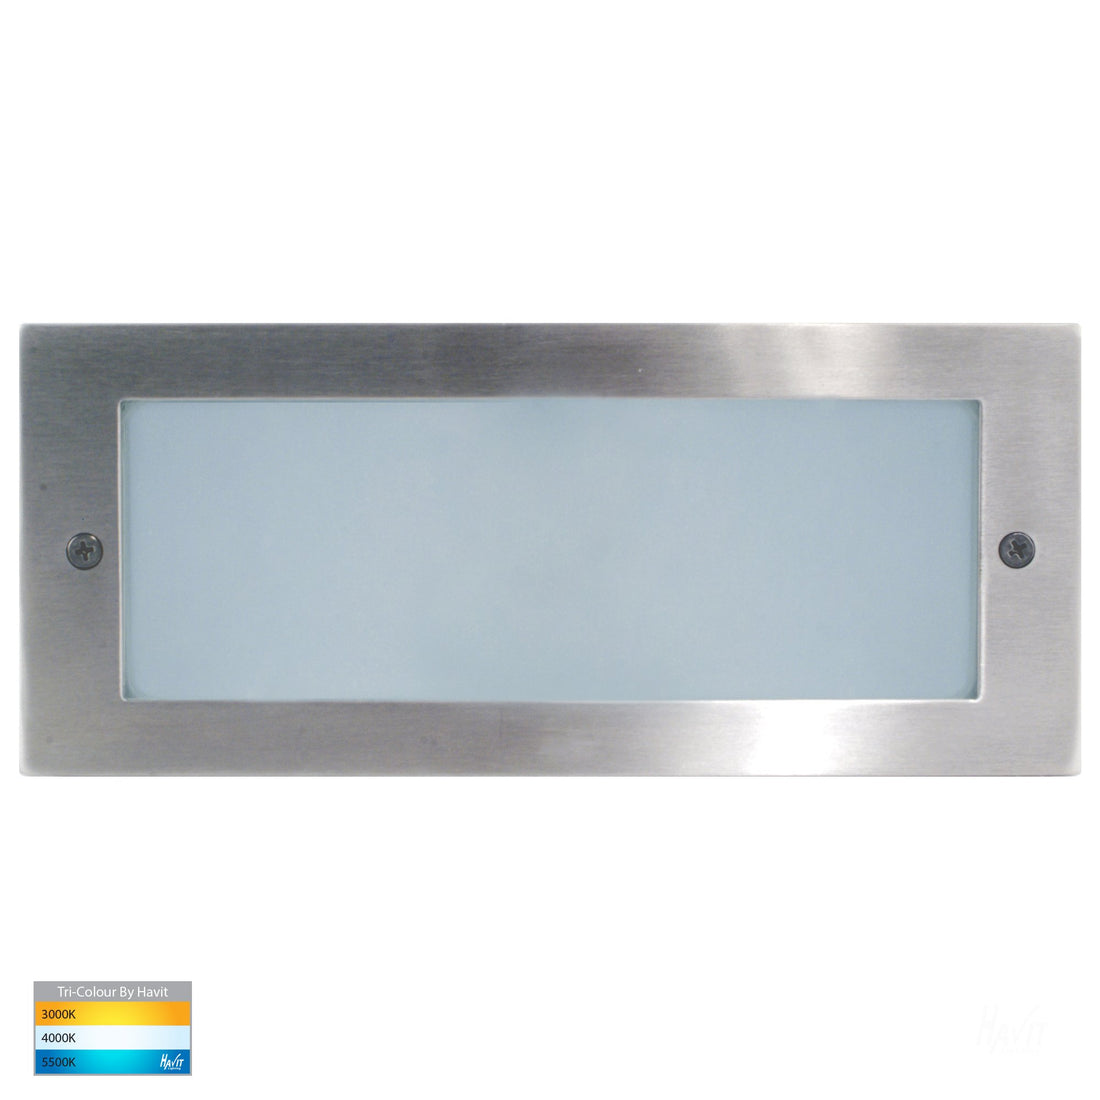 Bata Open-face 316 Stainless Steel Recessed Wall Brick Light